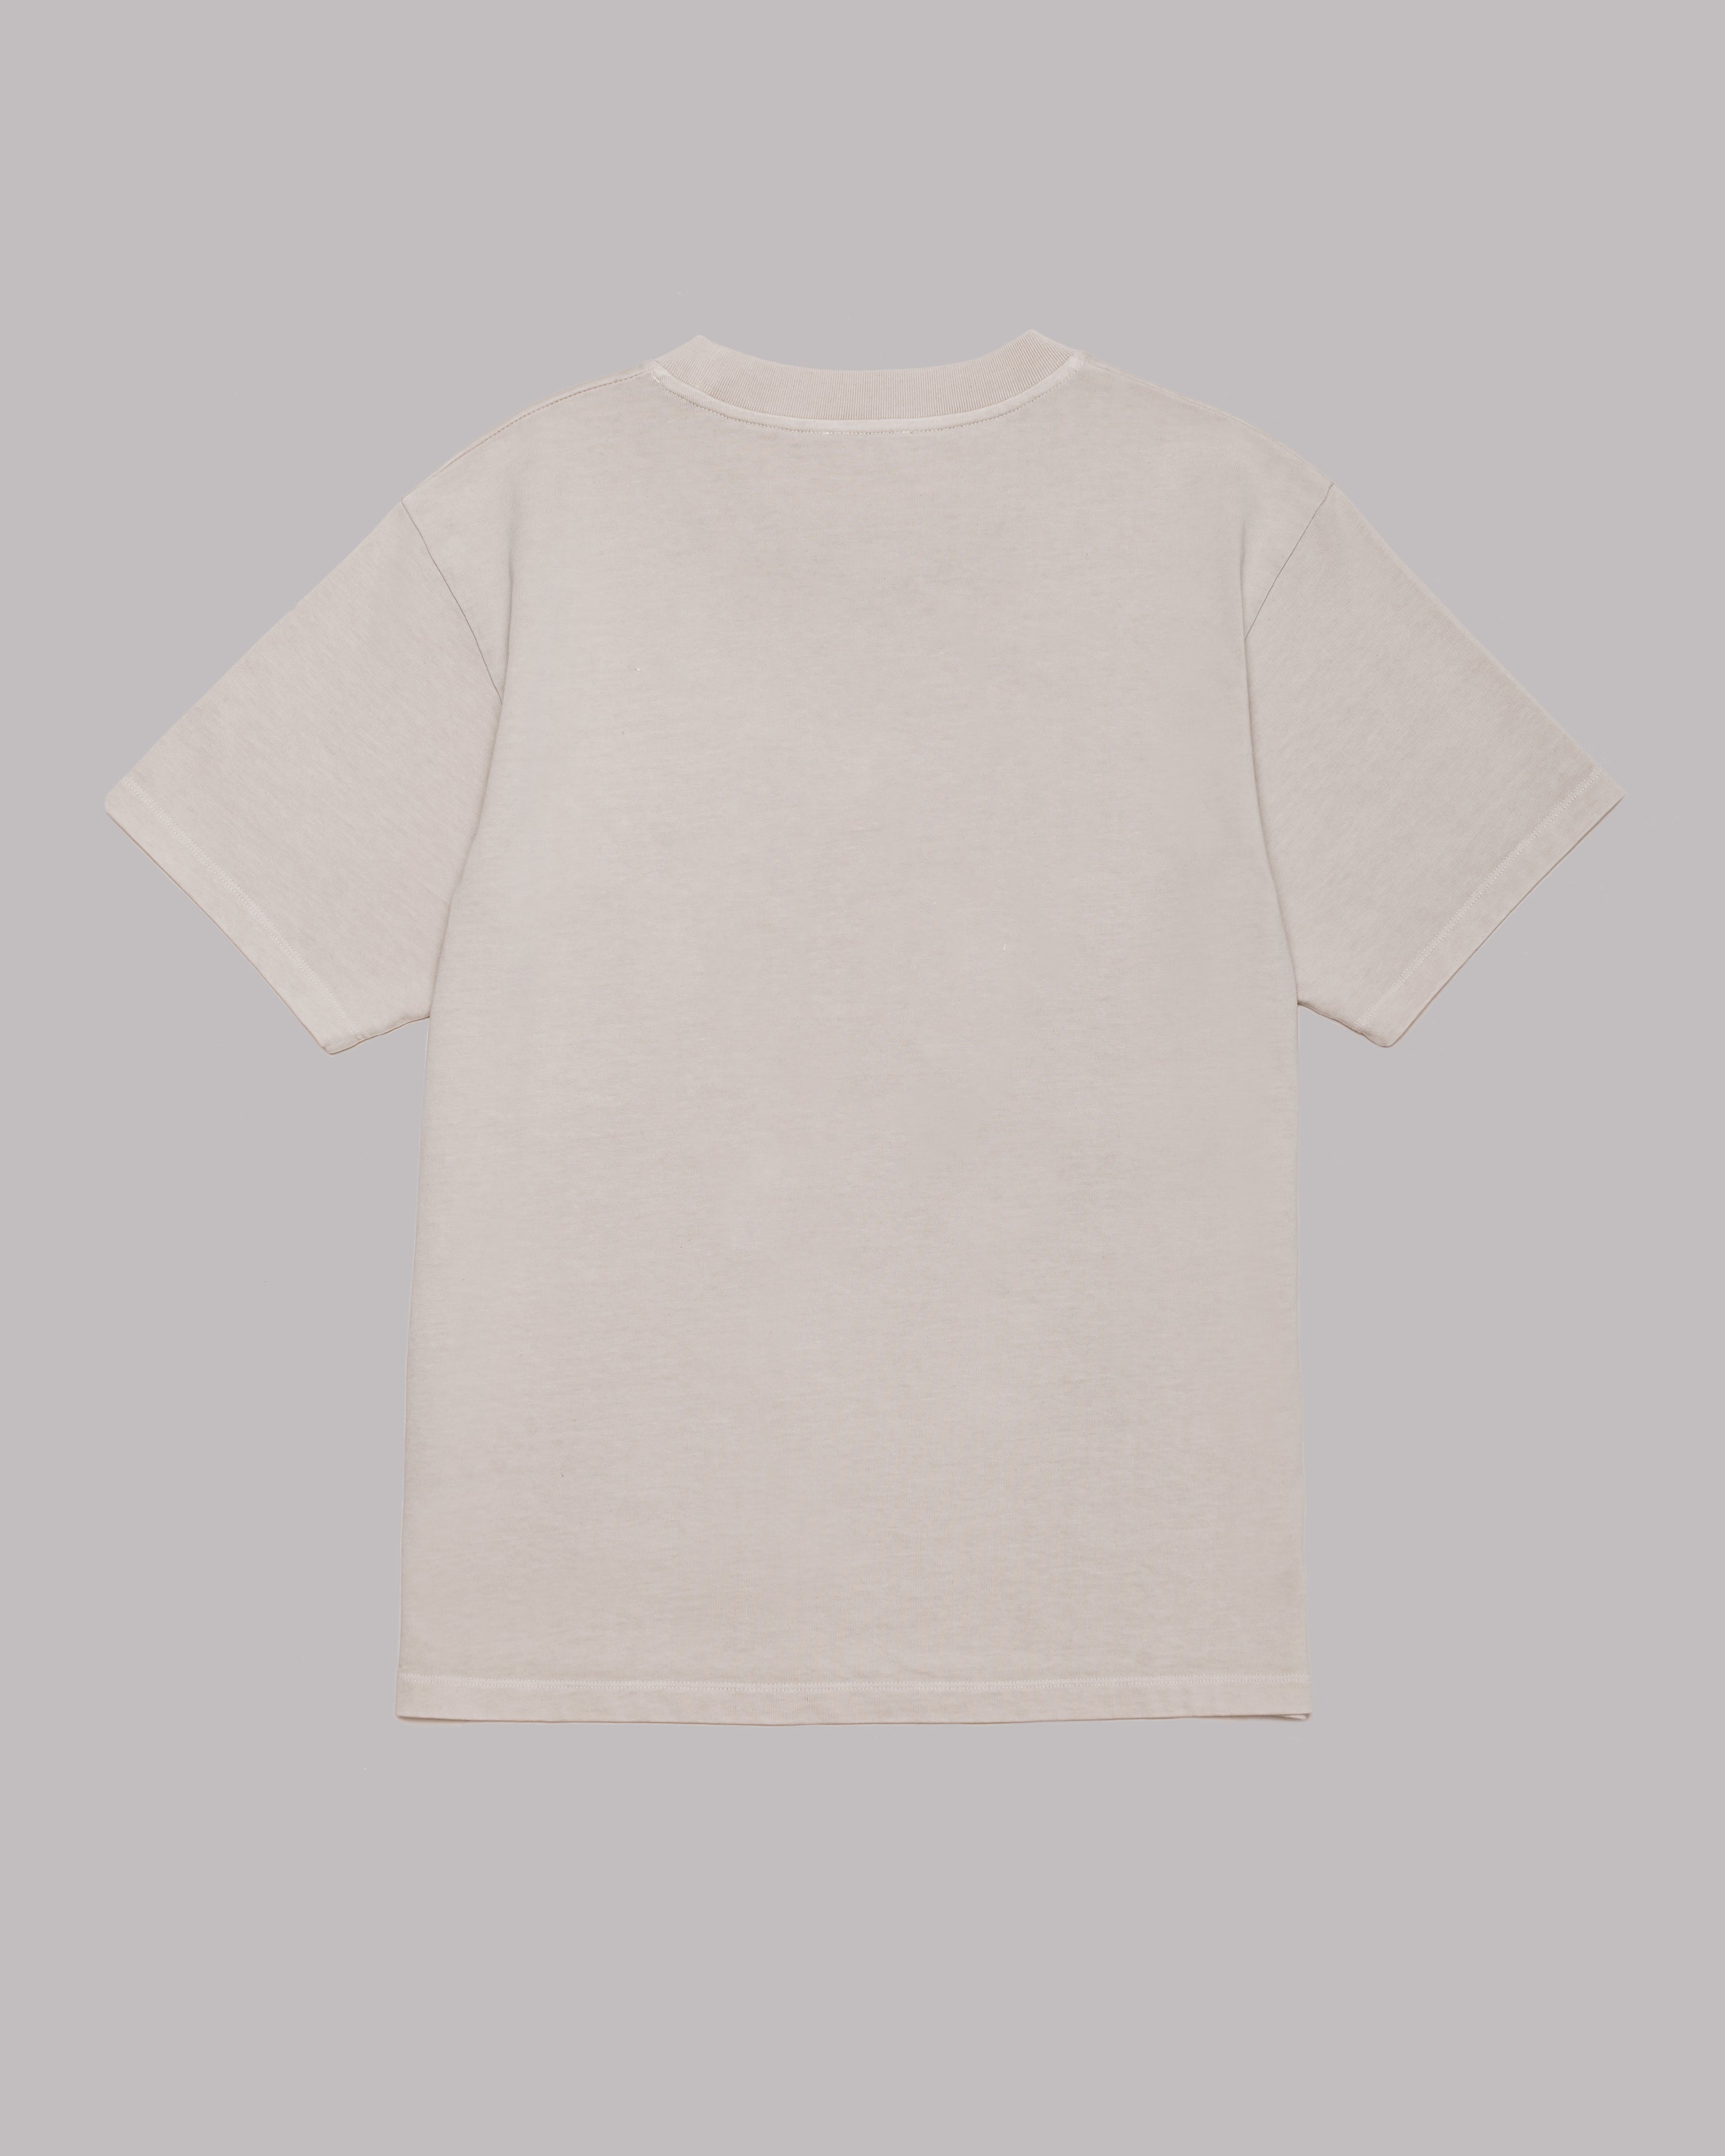 The Beige Embroidered Logo T-shirt